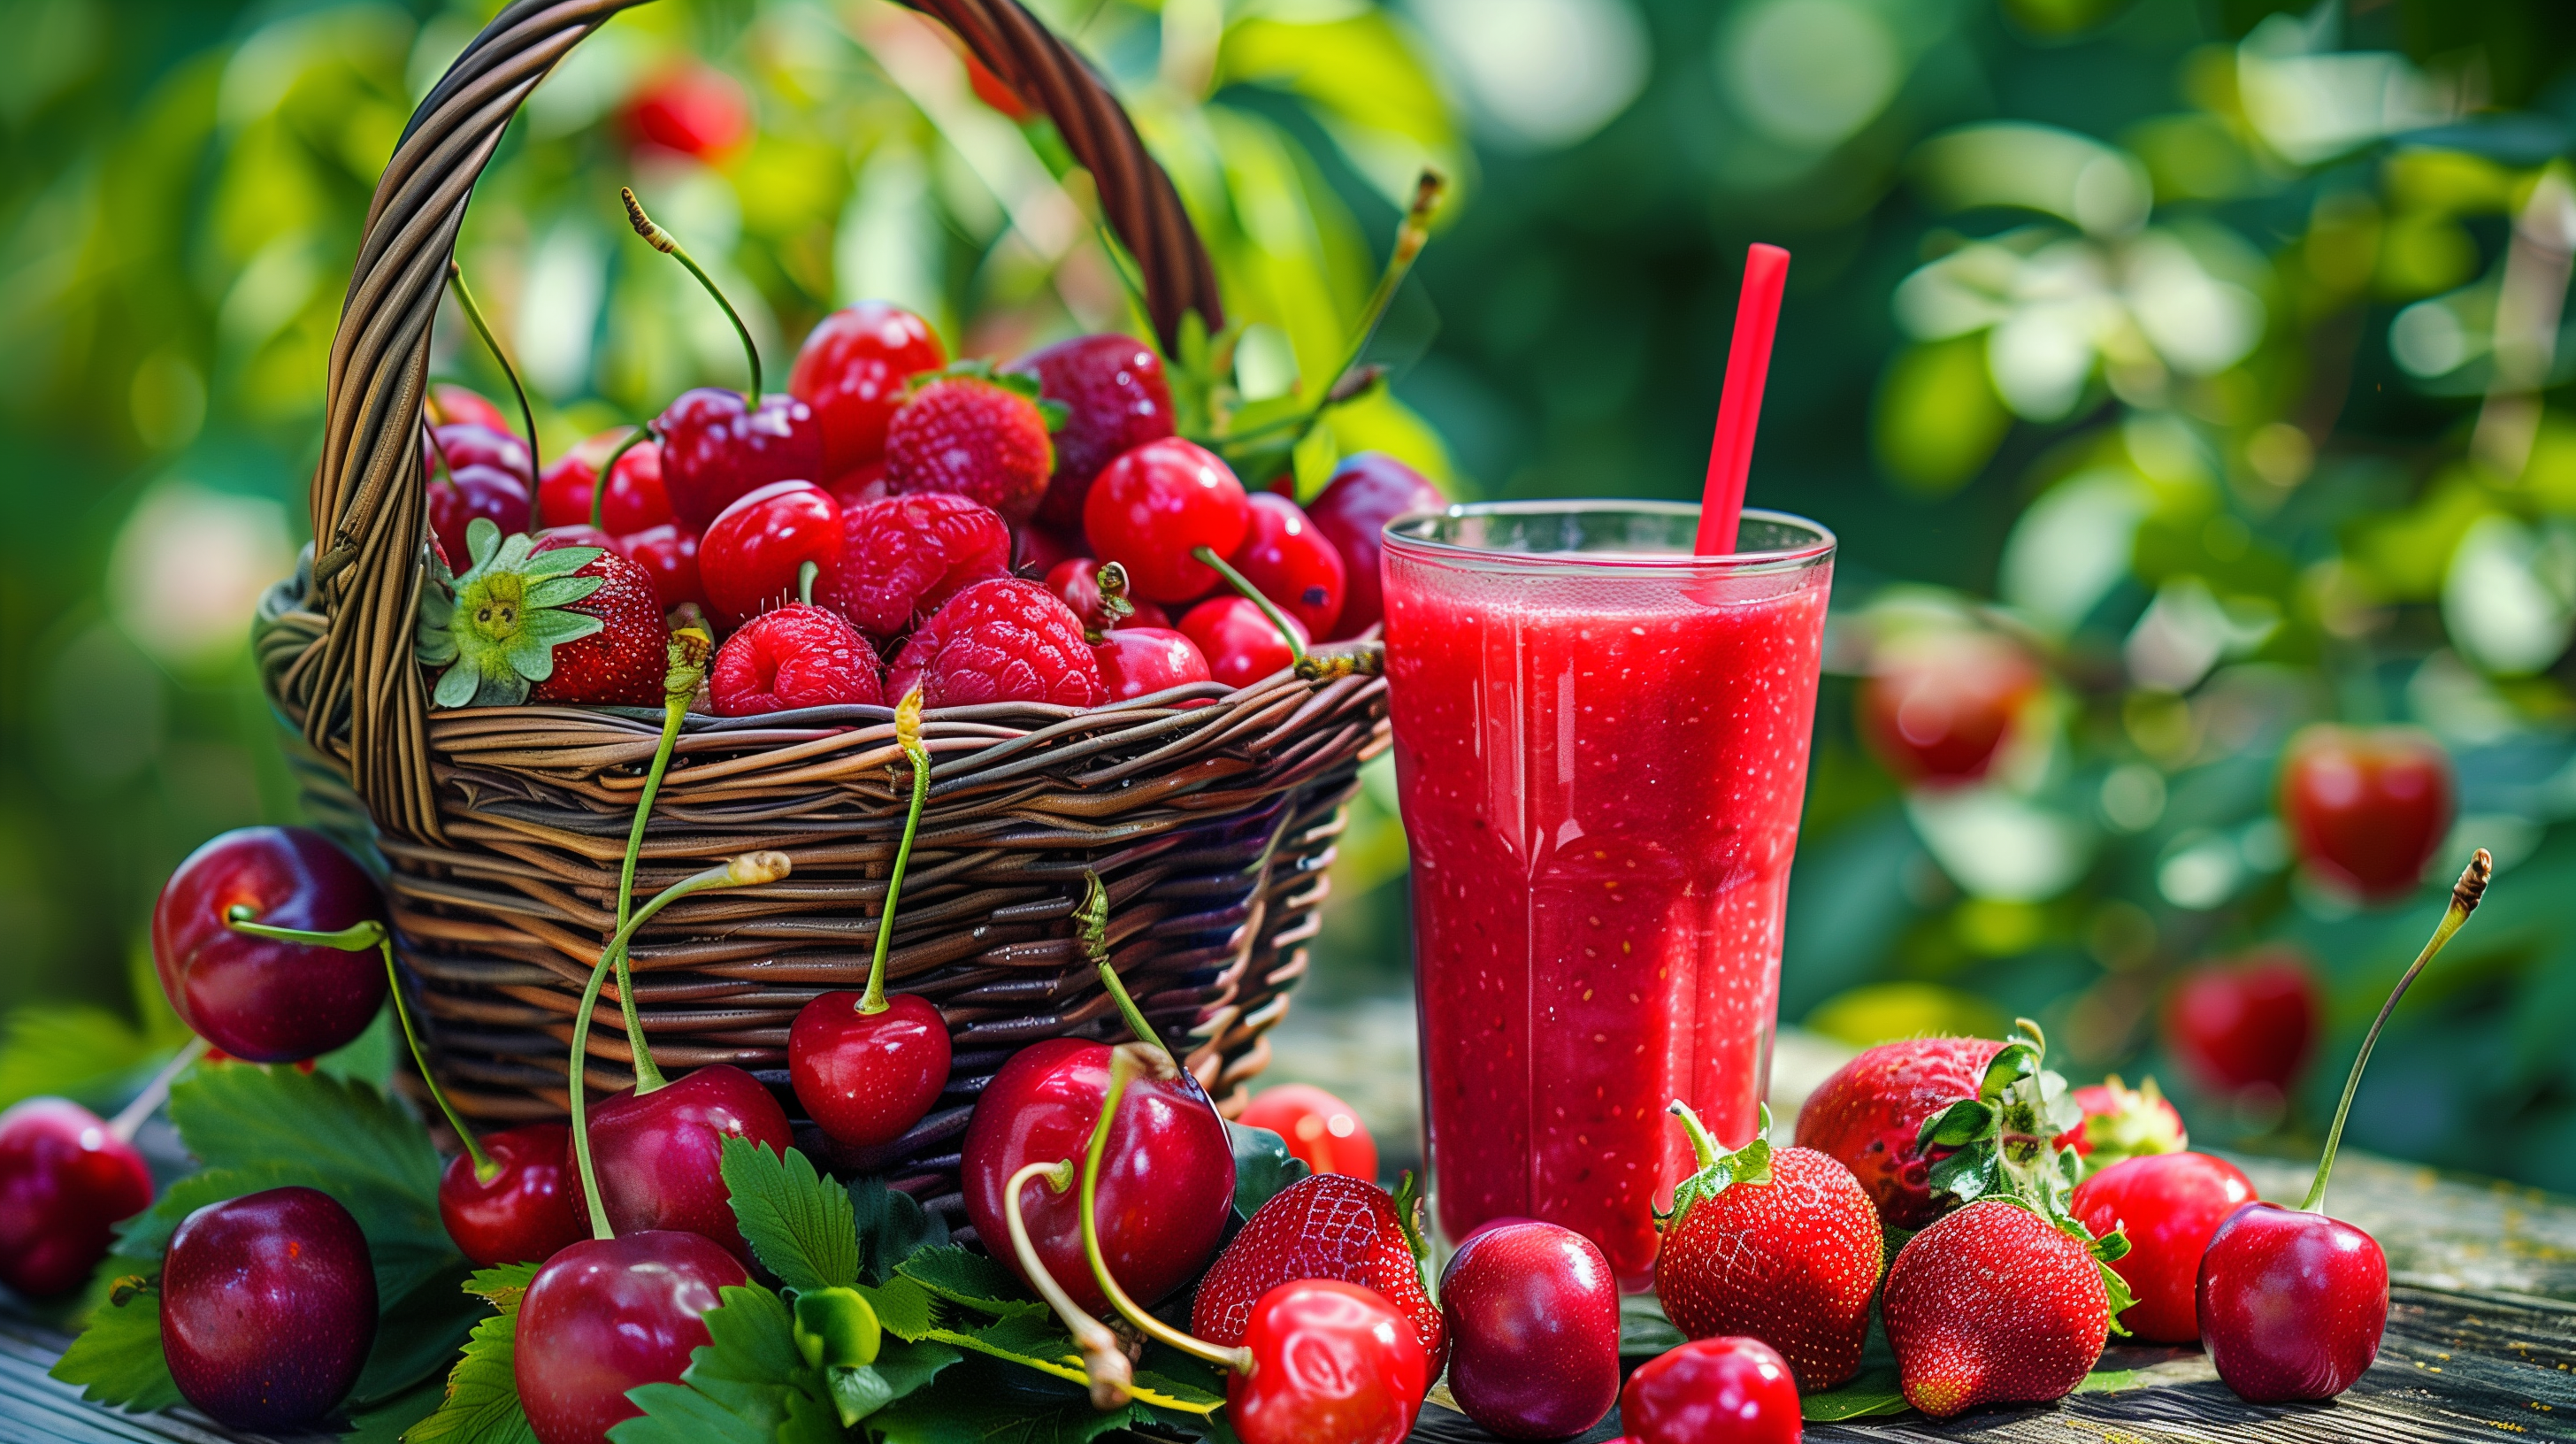 basket overflowing with red fruits – strawberries, cherries, raspberries, glass of red smoothie